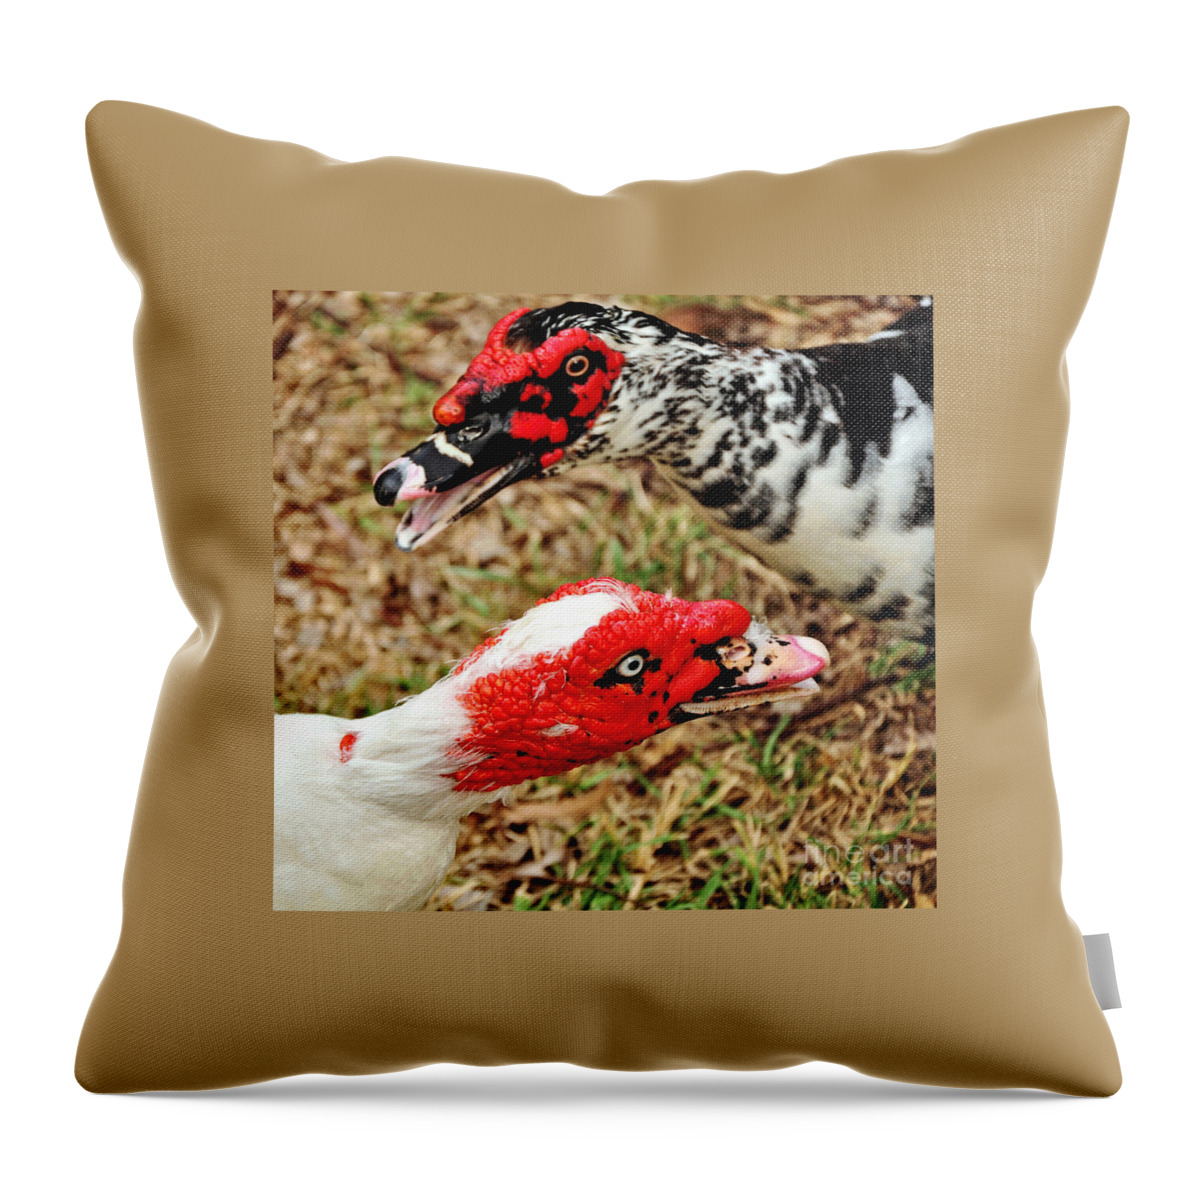 Duck Throw Pillow featuring the photograph Muscovy Ducks by Kaye Menner